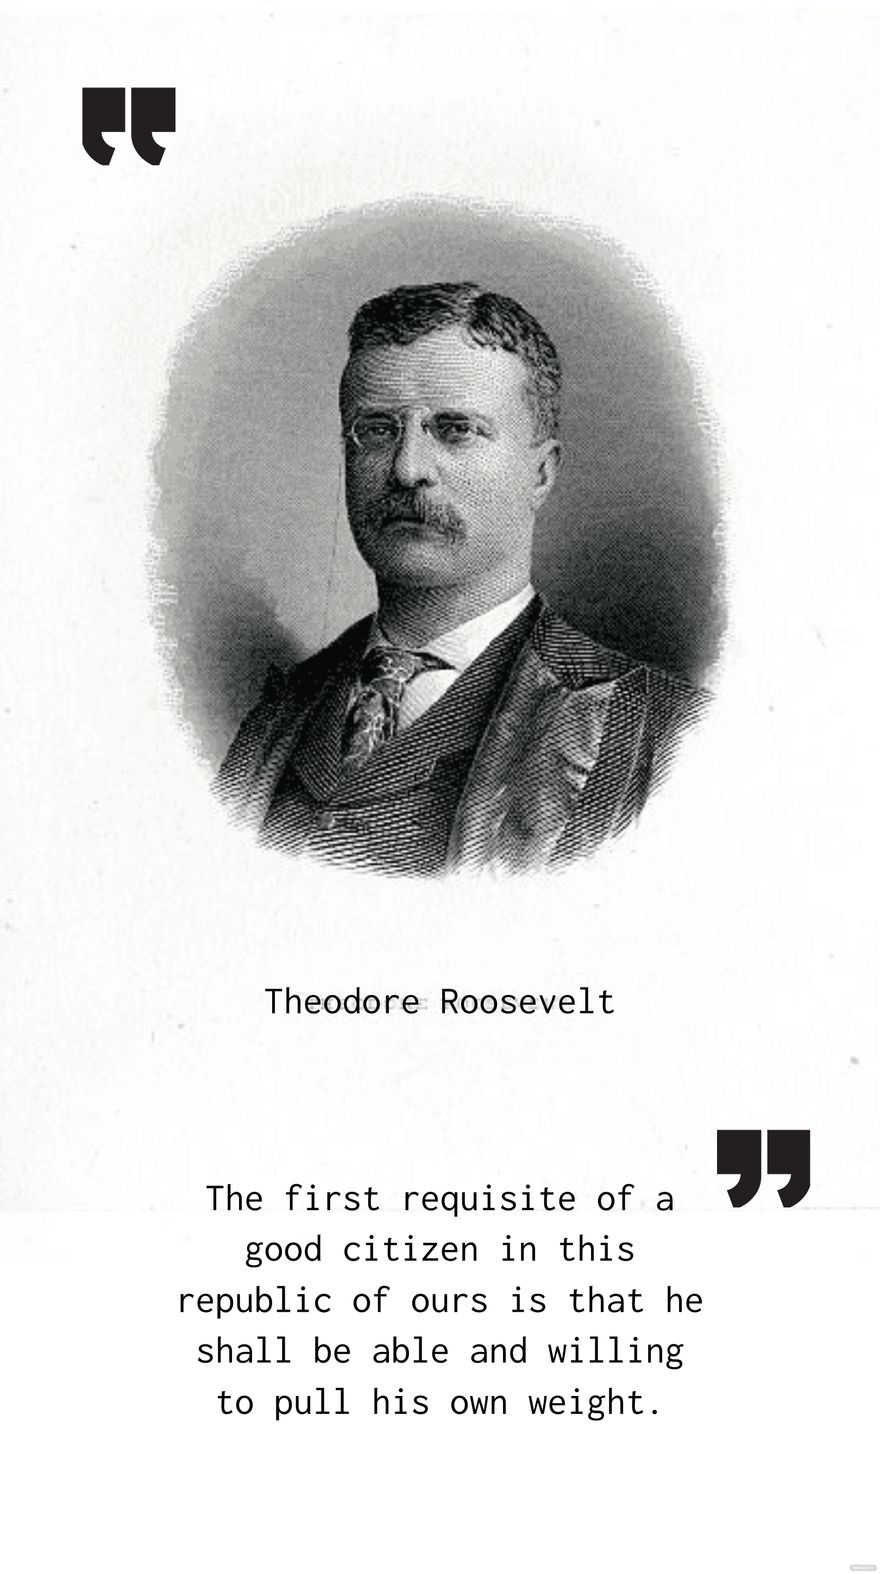 Free The first requisite of a good citizen in this republic of ours is that he shall be able and willing to pull his own weight. - Theodore Roosevelt in JPEG